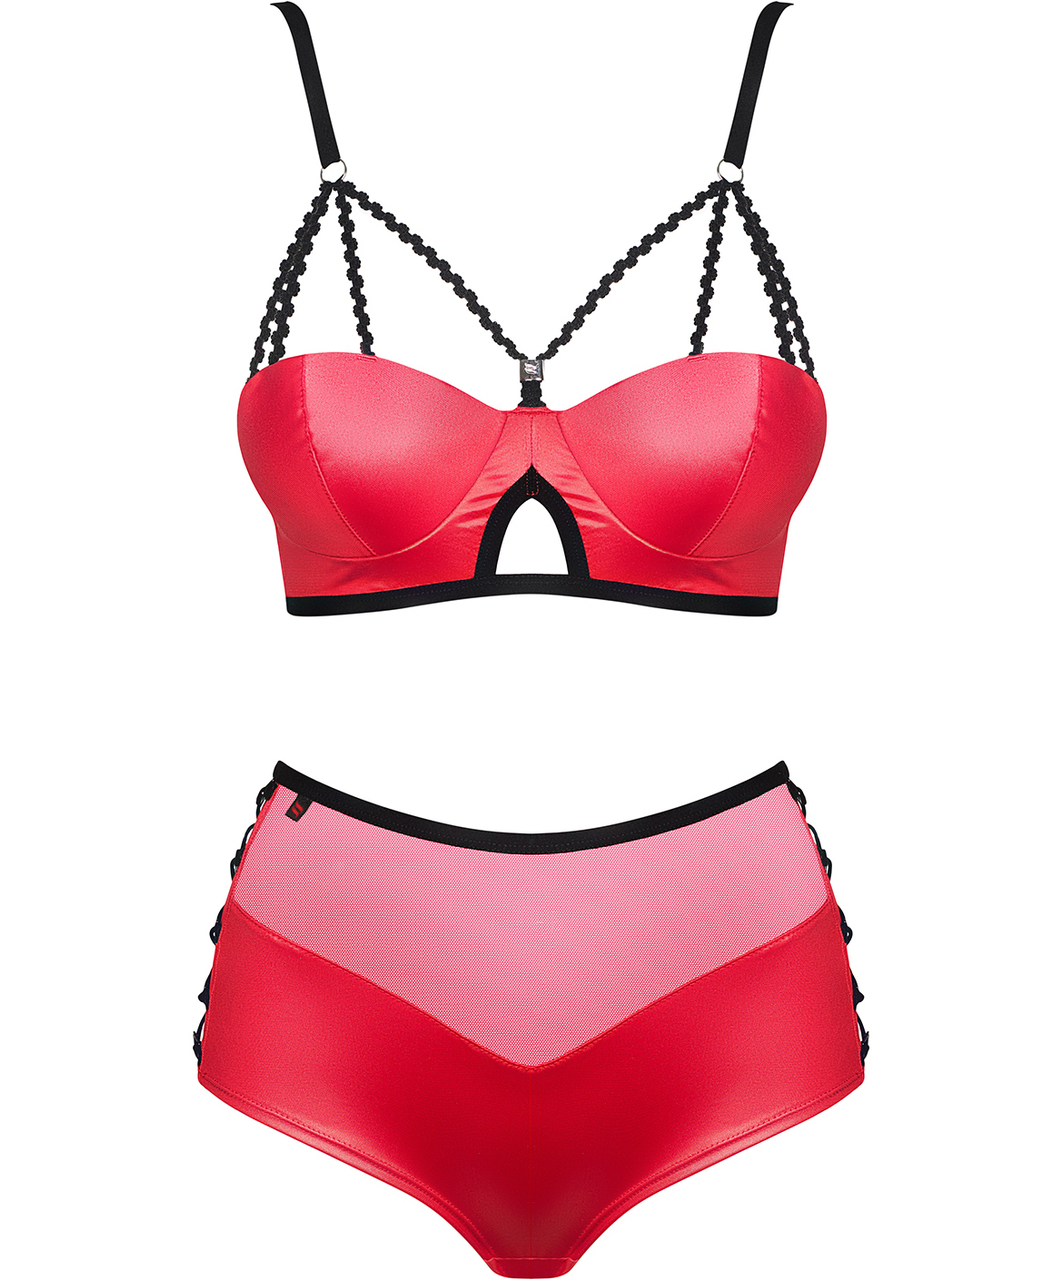 Obsessive Leatheria red wet look lingerie set